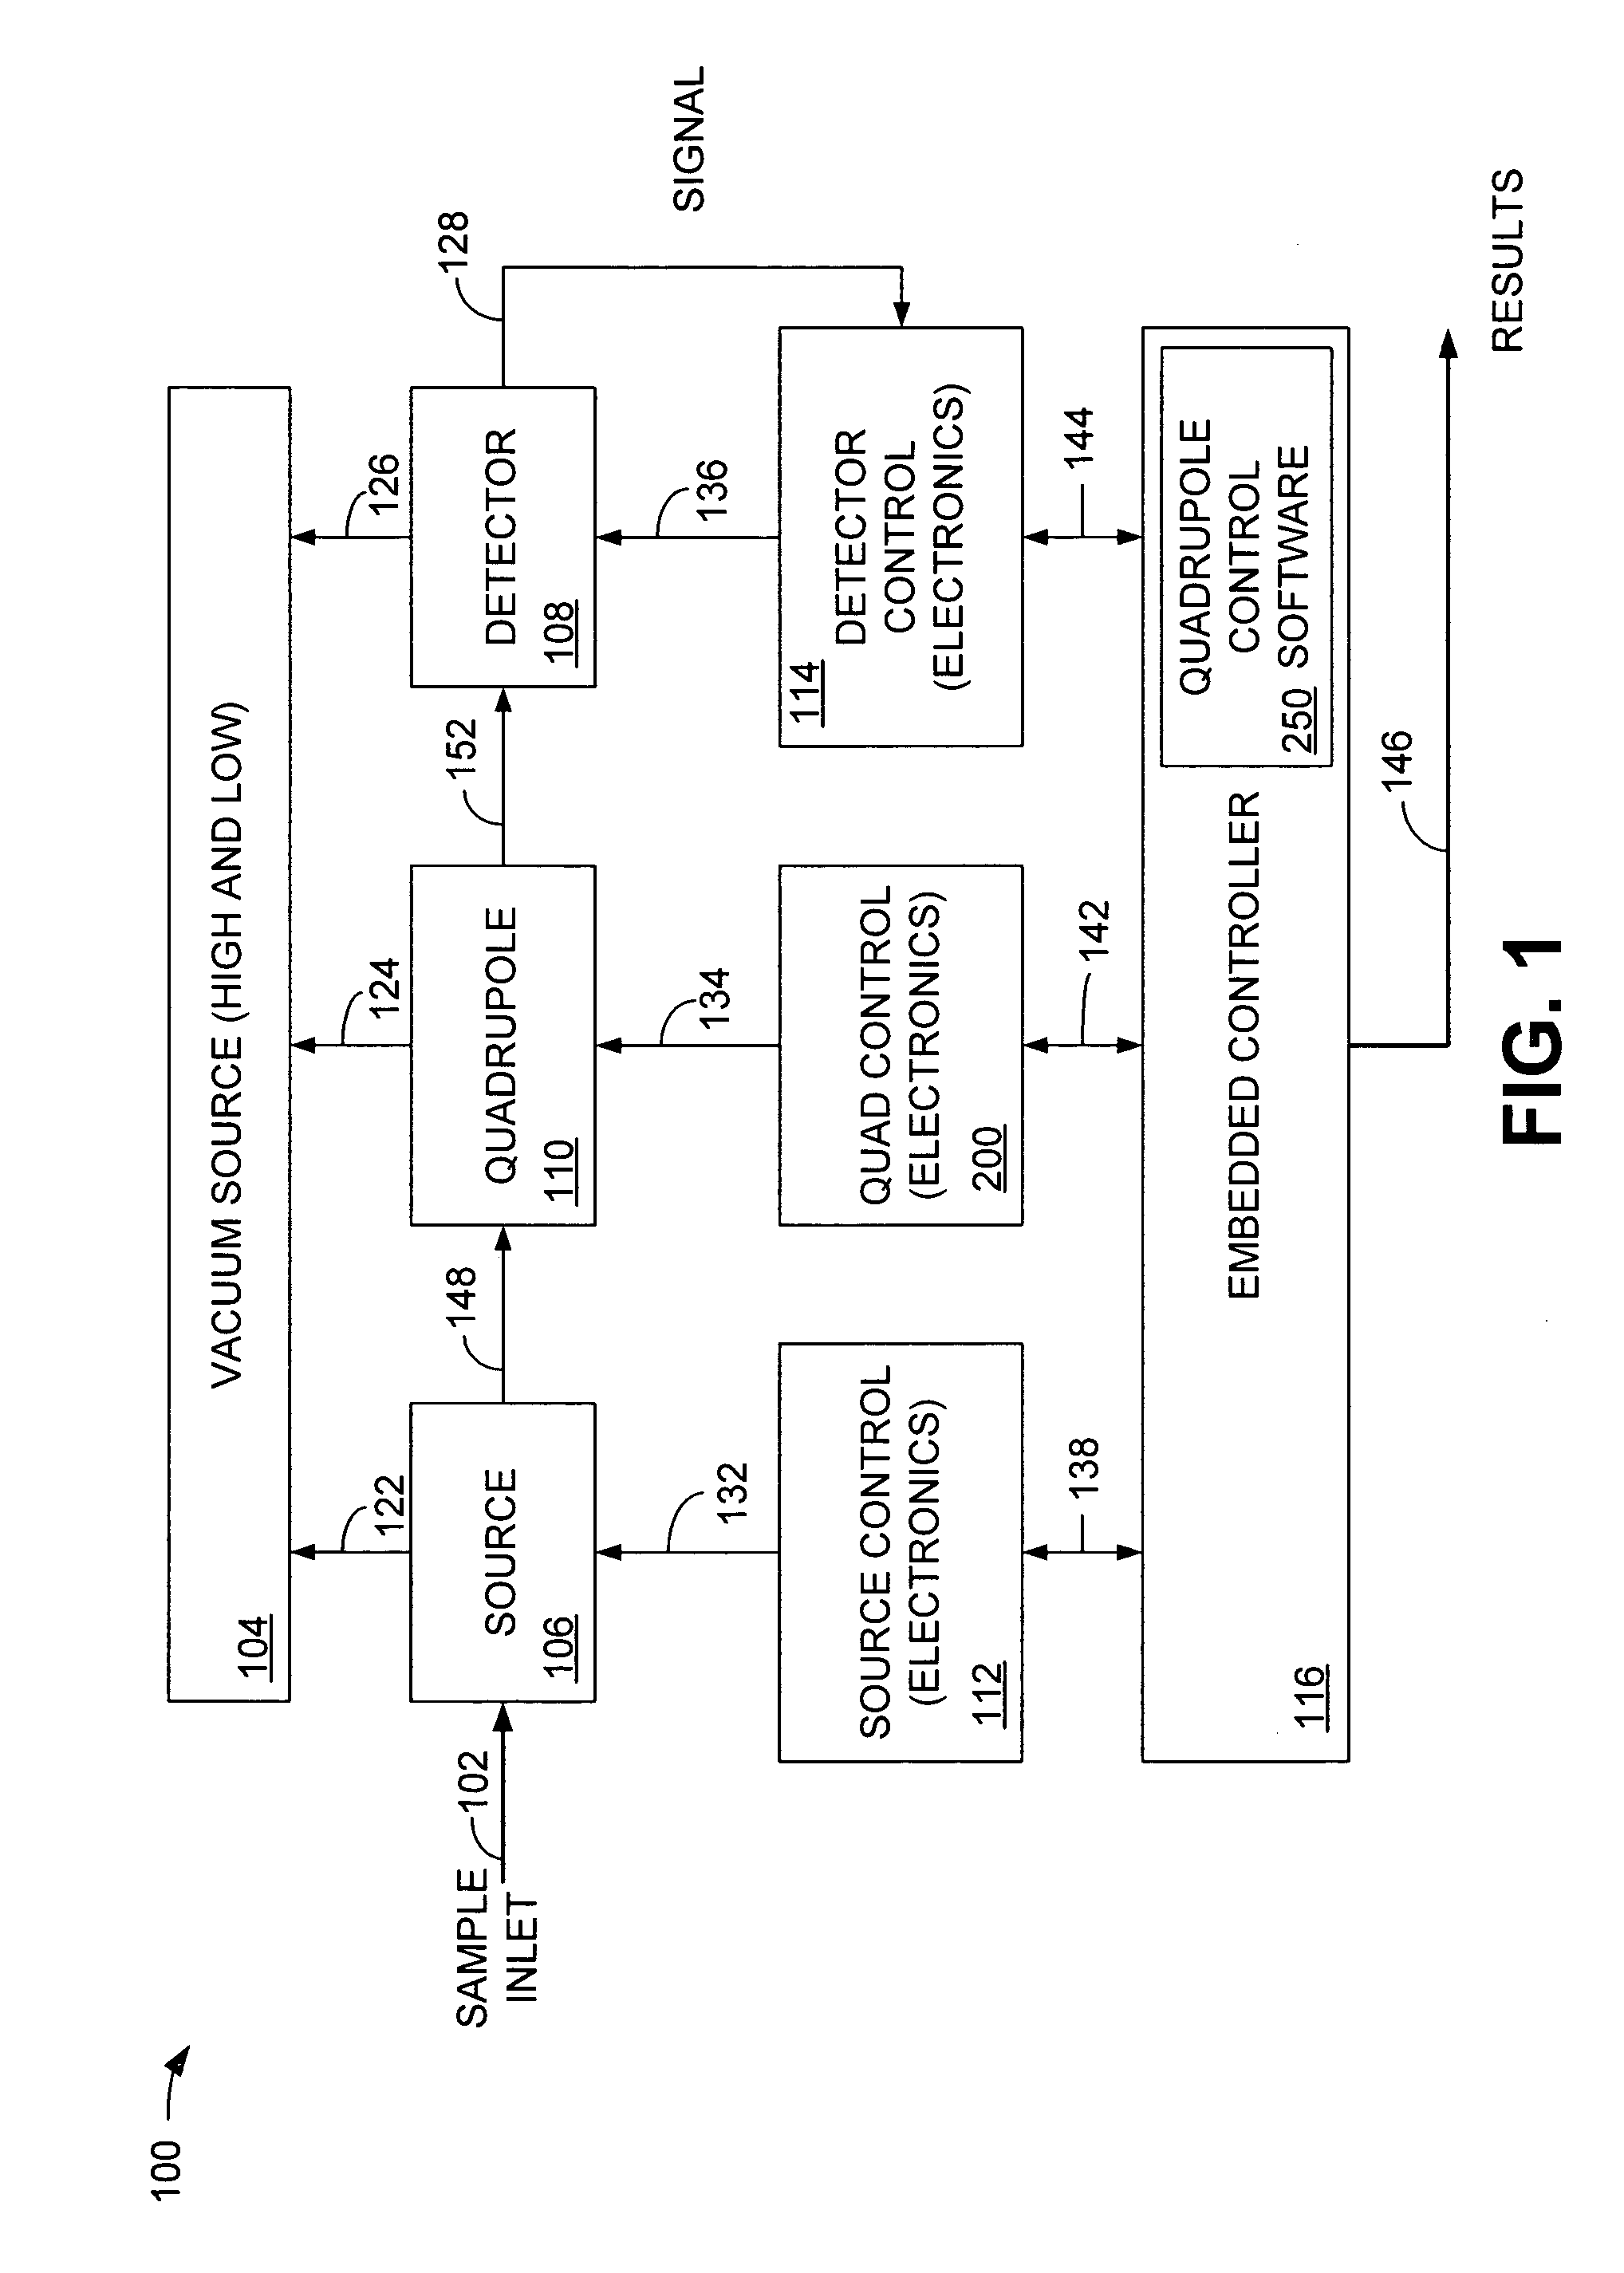 Apparatus and method for electronically driving a quadrupole mass spectrometer to improve signal performance at fast scan rates